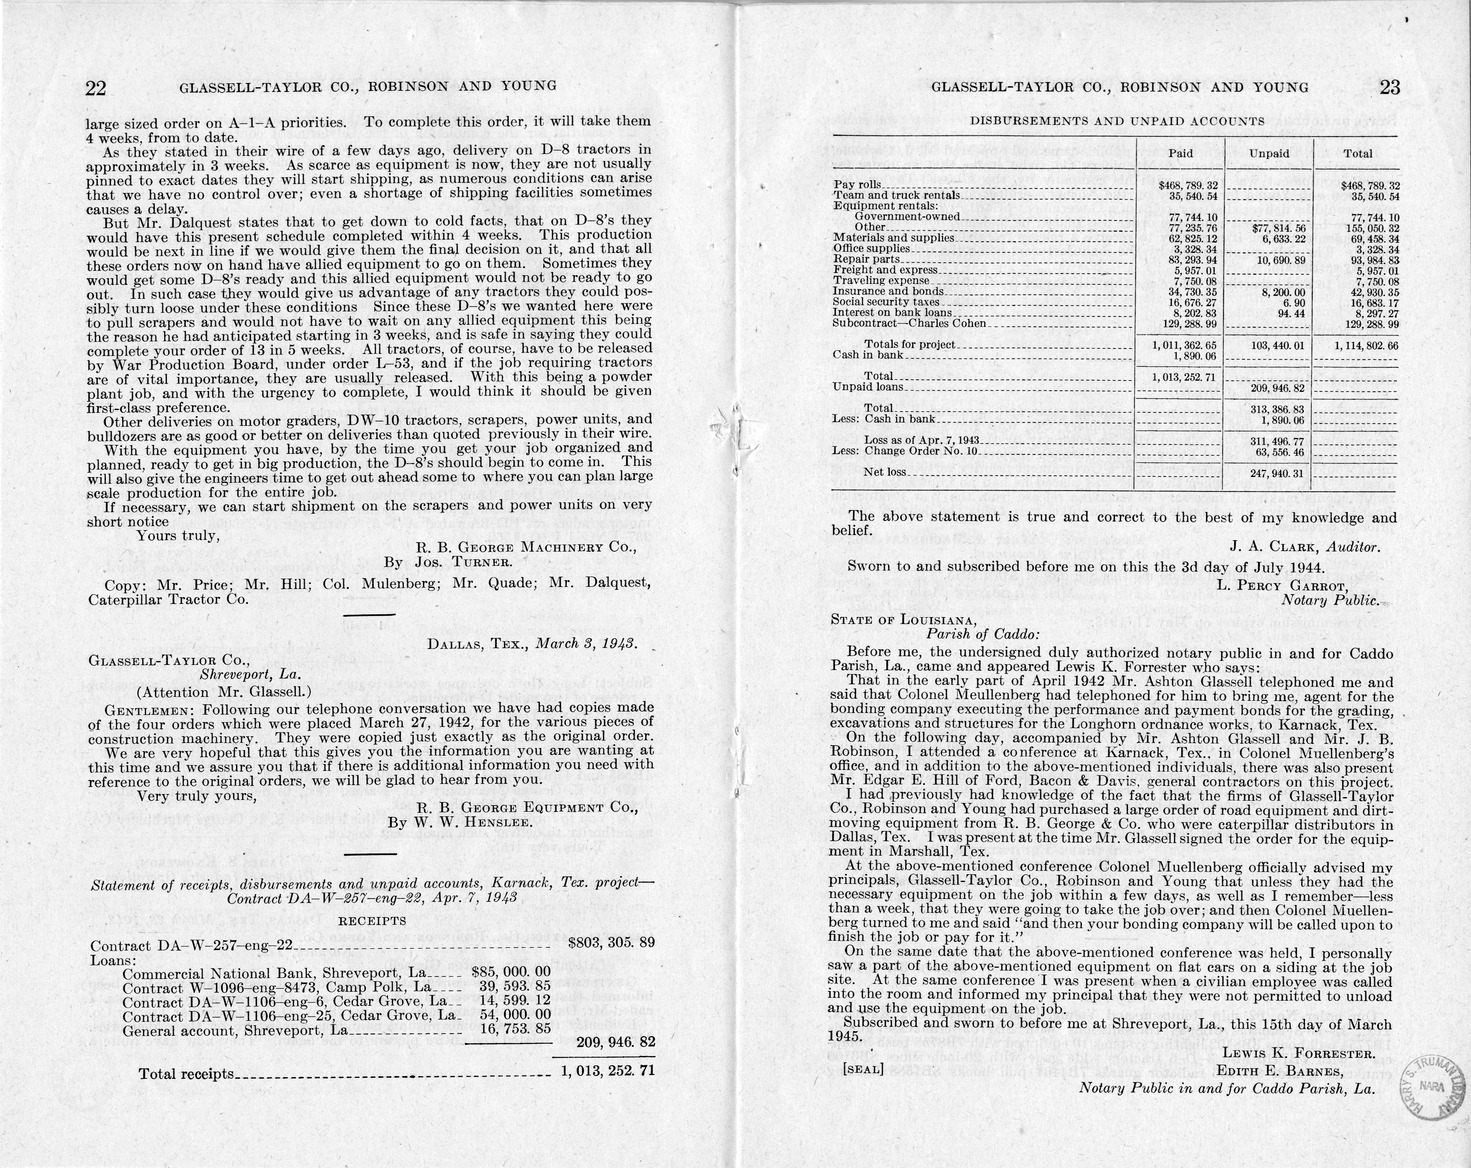 Memorandum from Paul Appleby to M. C. Latta, H.R. 1975, For the Relief of the Glassell-Taylor Company, Robinson and Young, with Attachments